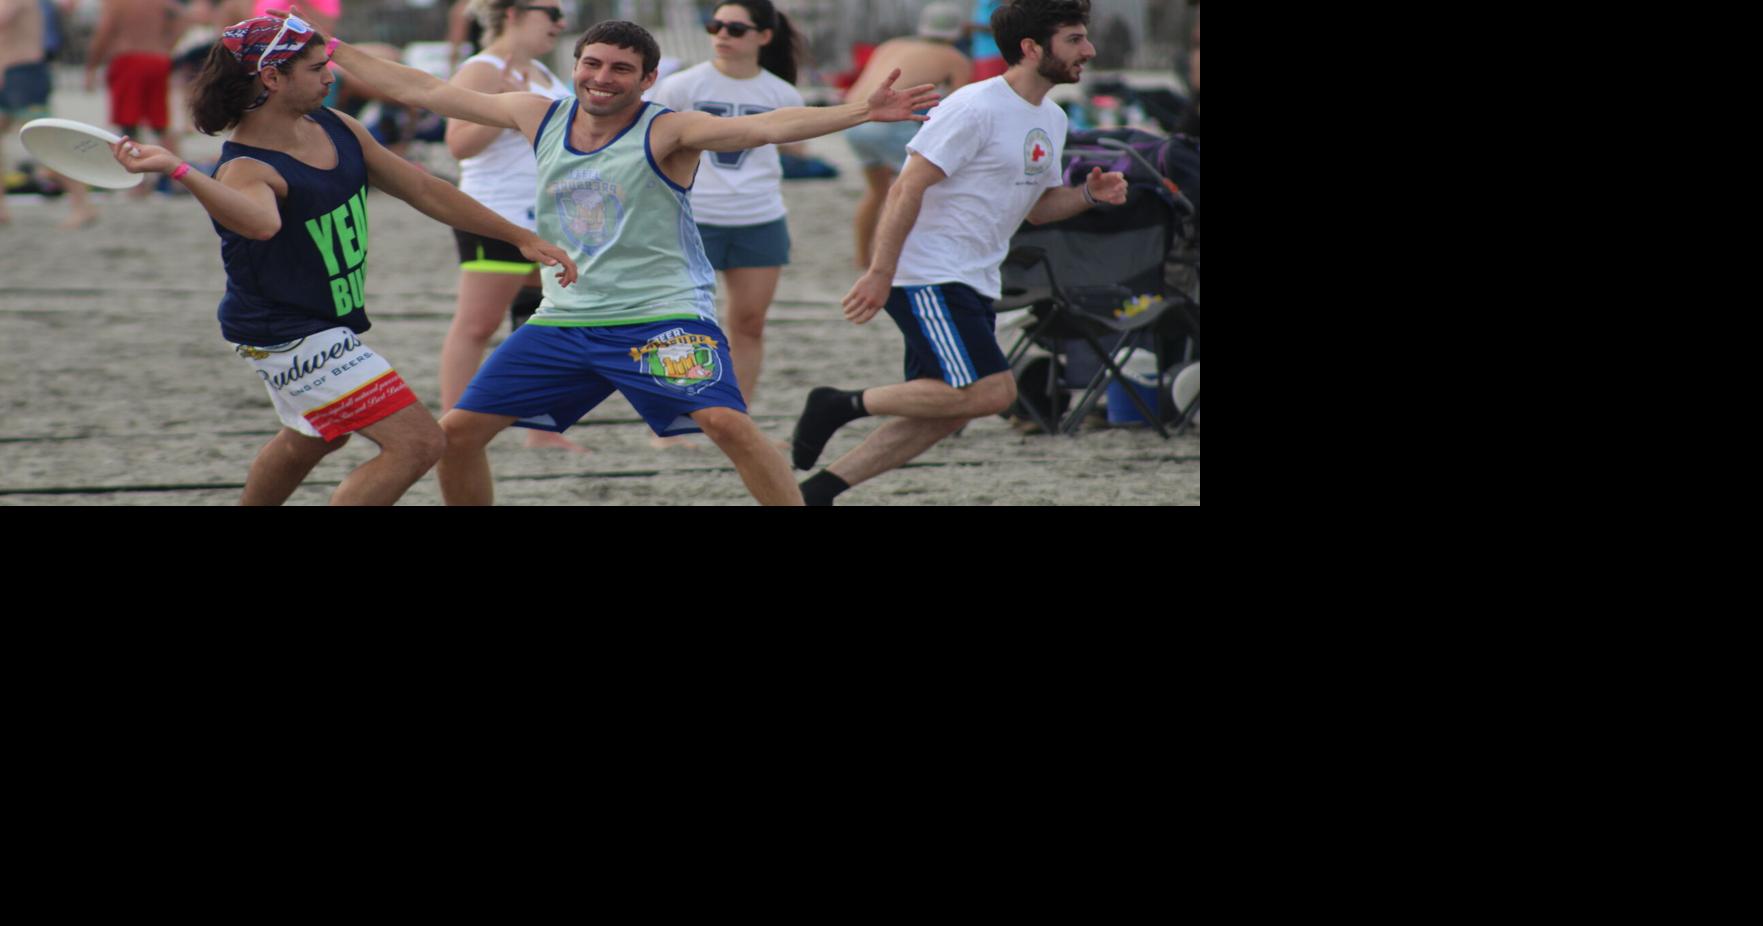 Thousands gather on Wildwood beach for ultimate frisbee tournament